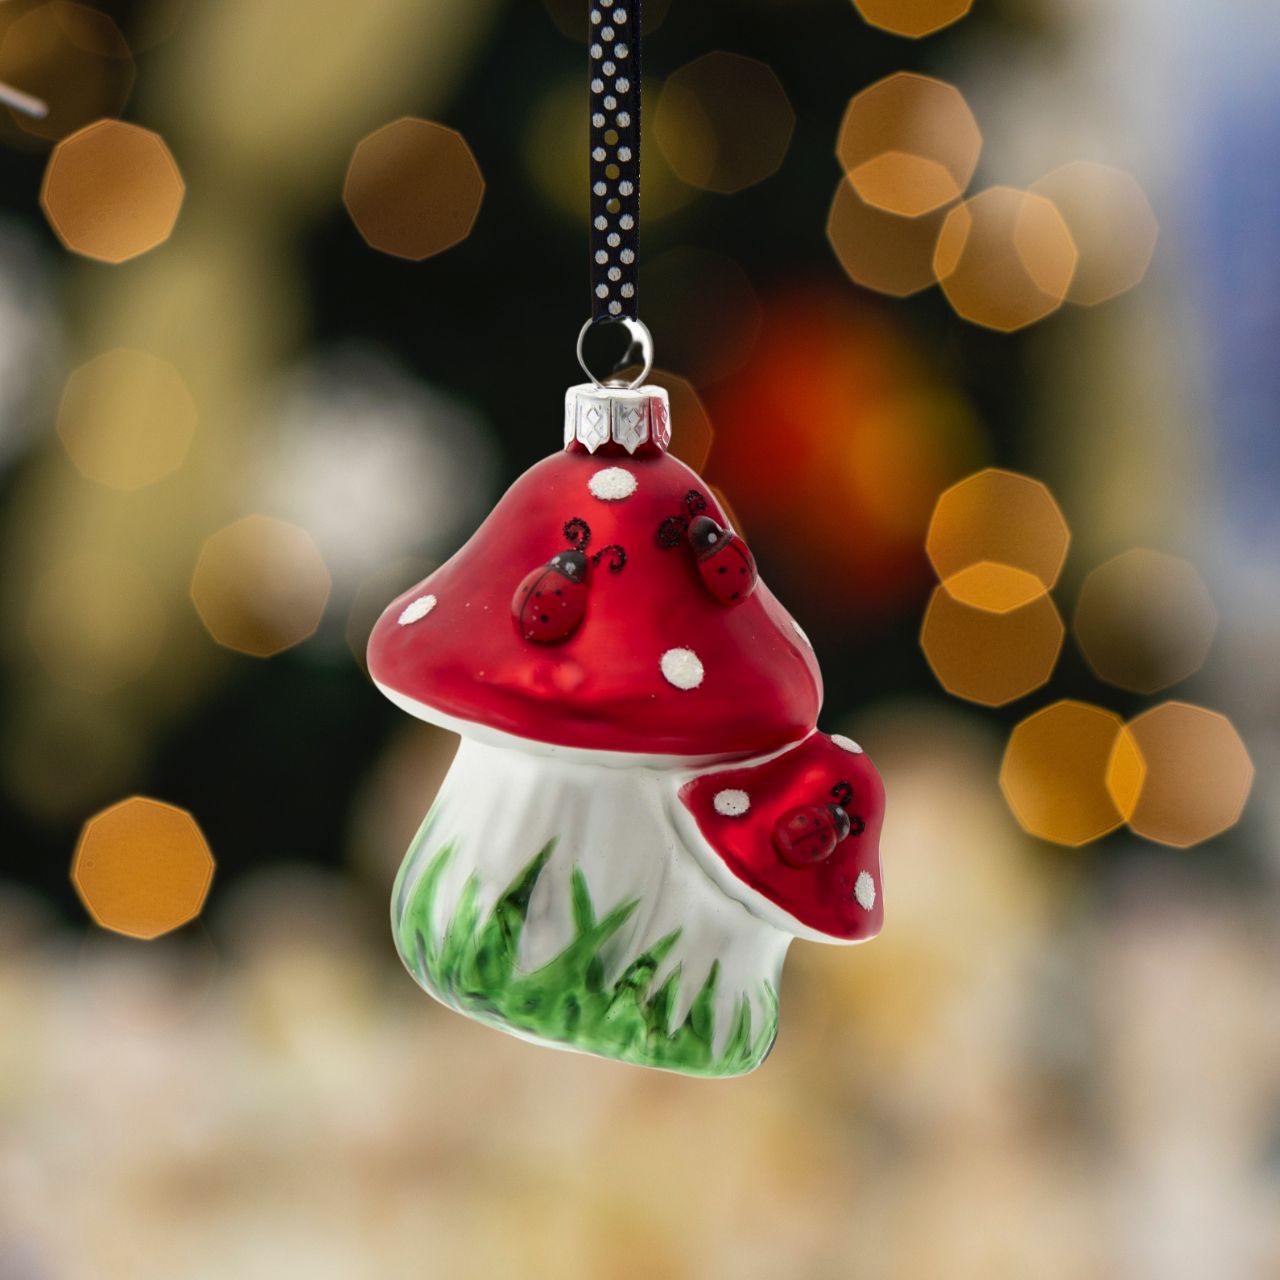 Ladybug On Mushroom Christmas Ornaments - Double Mushroom Head  Kurt Adler's red and white mushroom ornaments are a fun and festive addition to any holiday décor or Christmas tree. Double Mushroom head is decorated with green grass and red and black ladybugs.